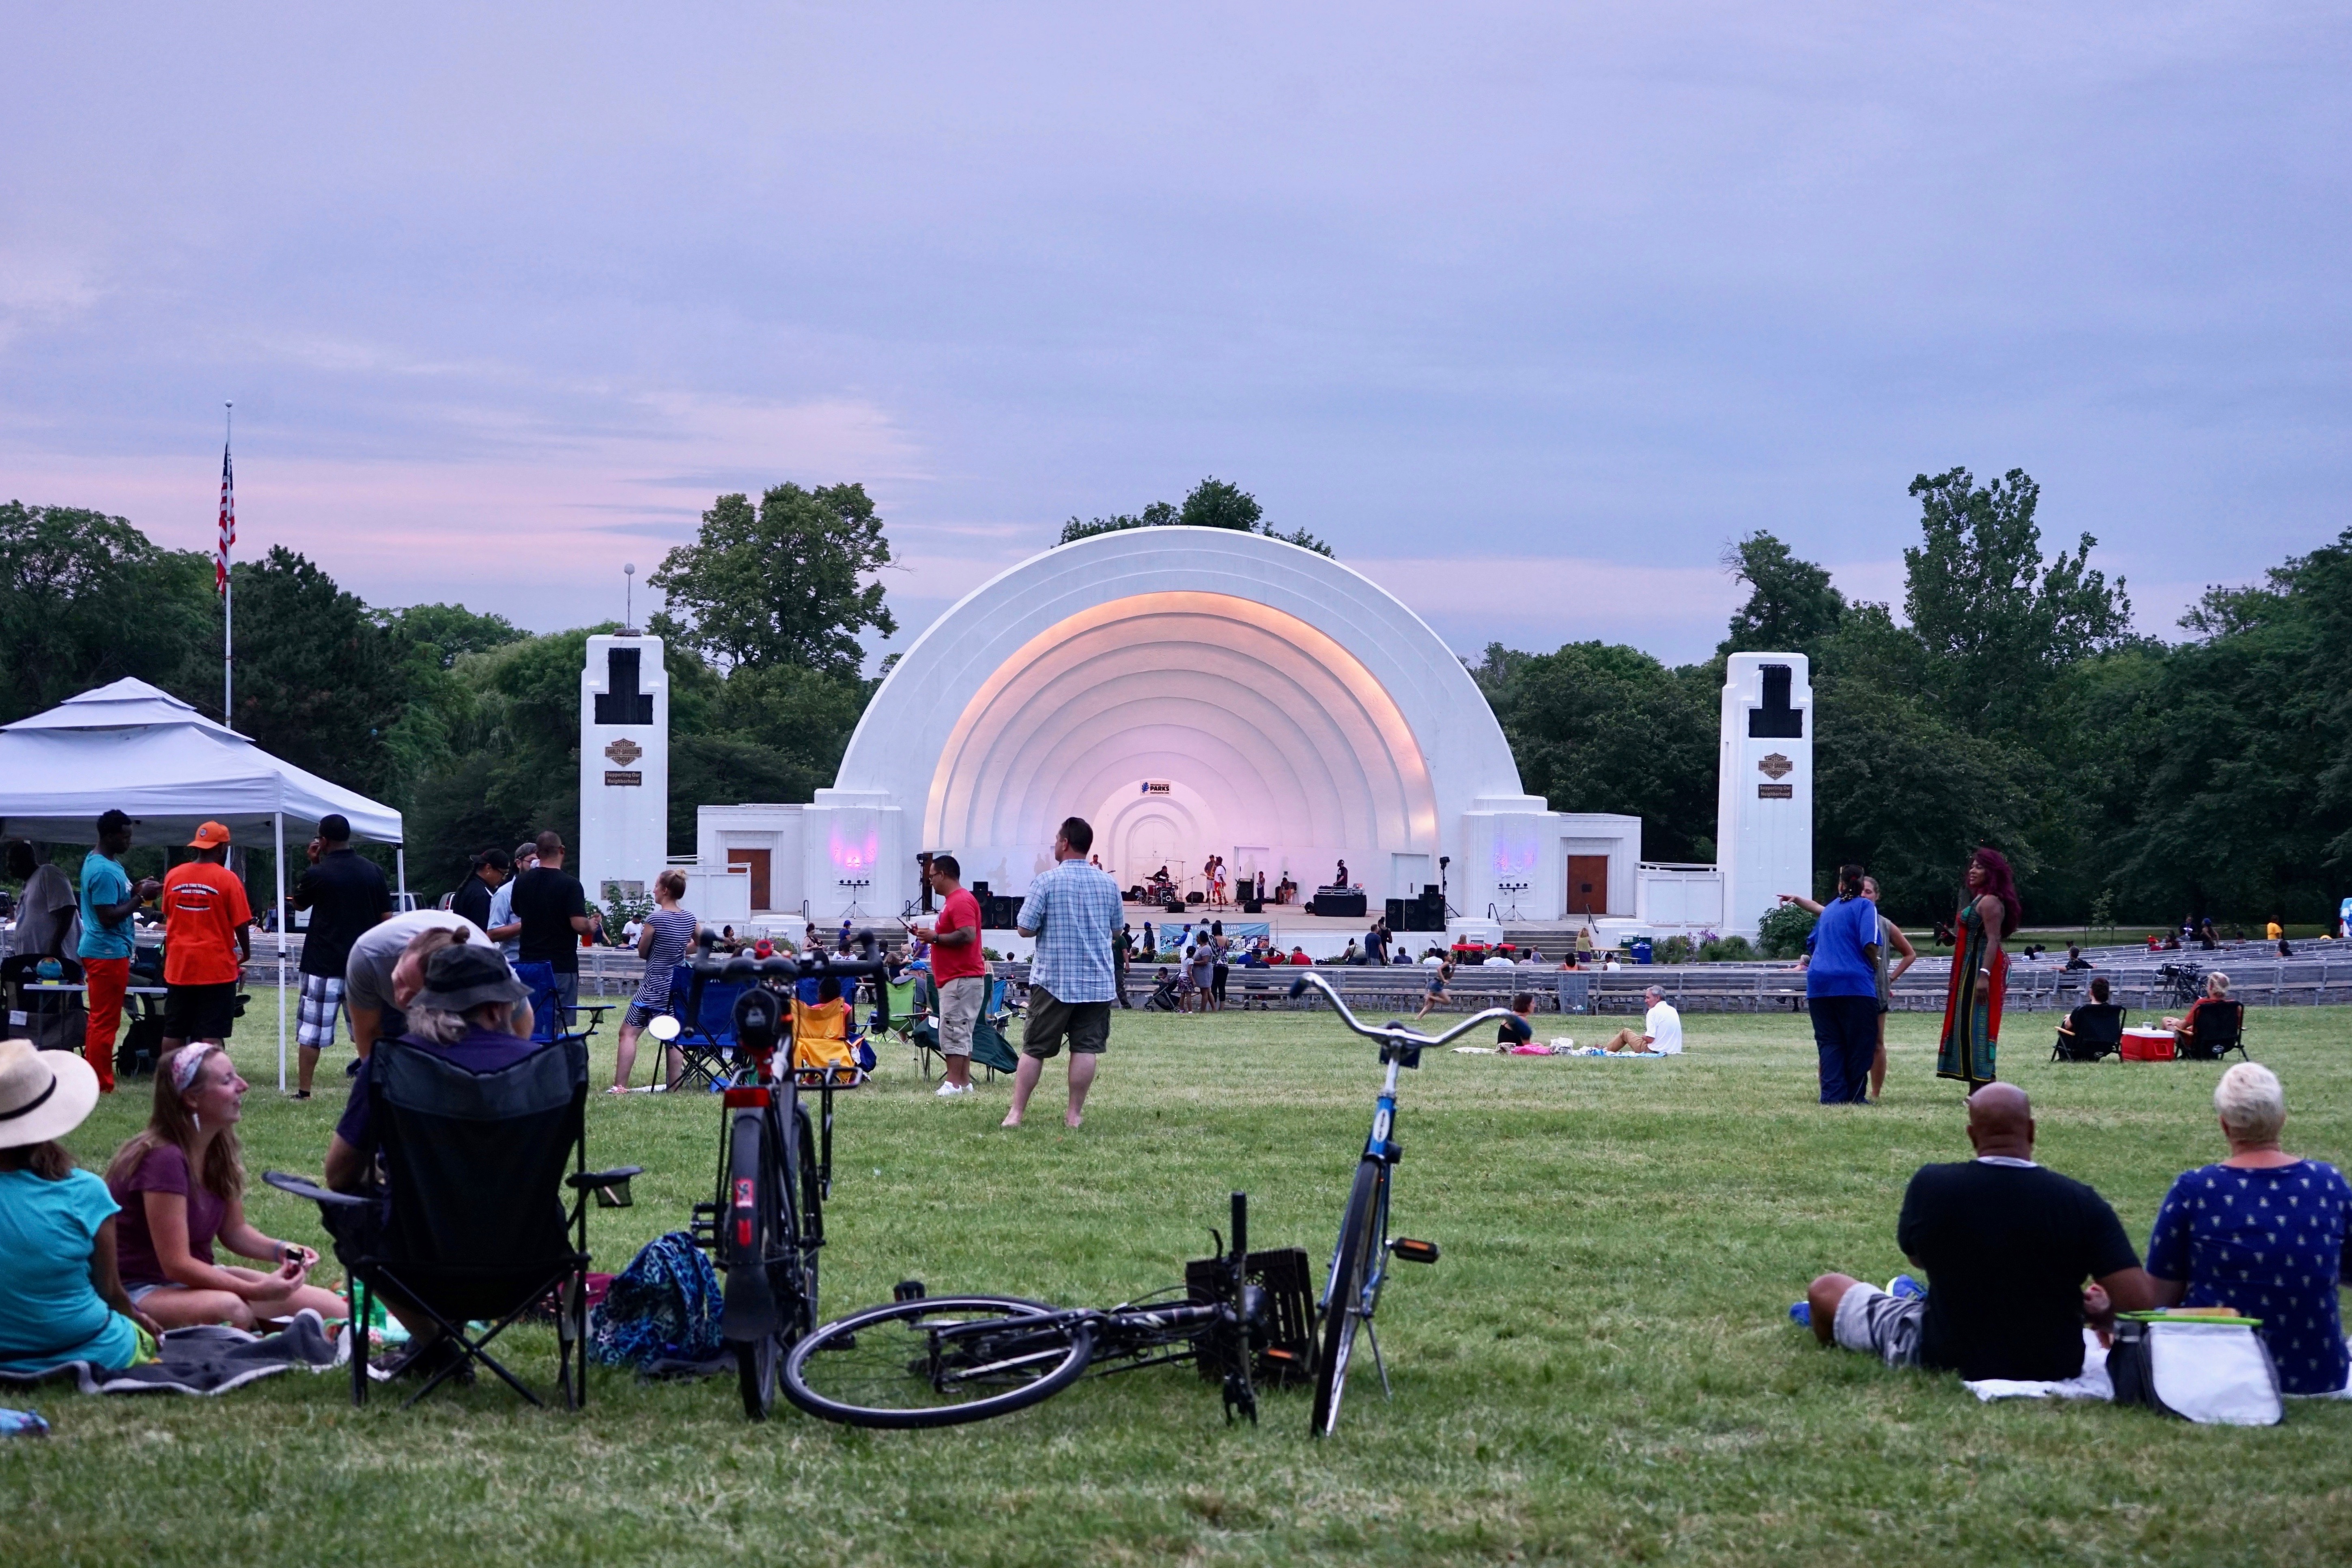 The bandshell in Washington Park is the place to be on Wednesday nights in the summer. Photo by Adam Carr/NNS.